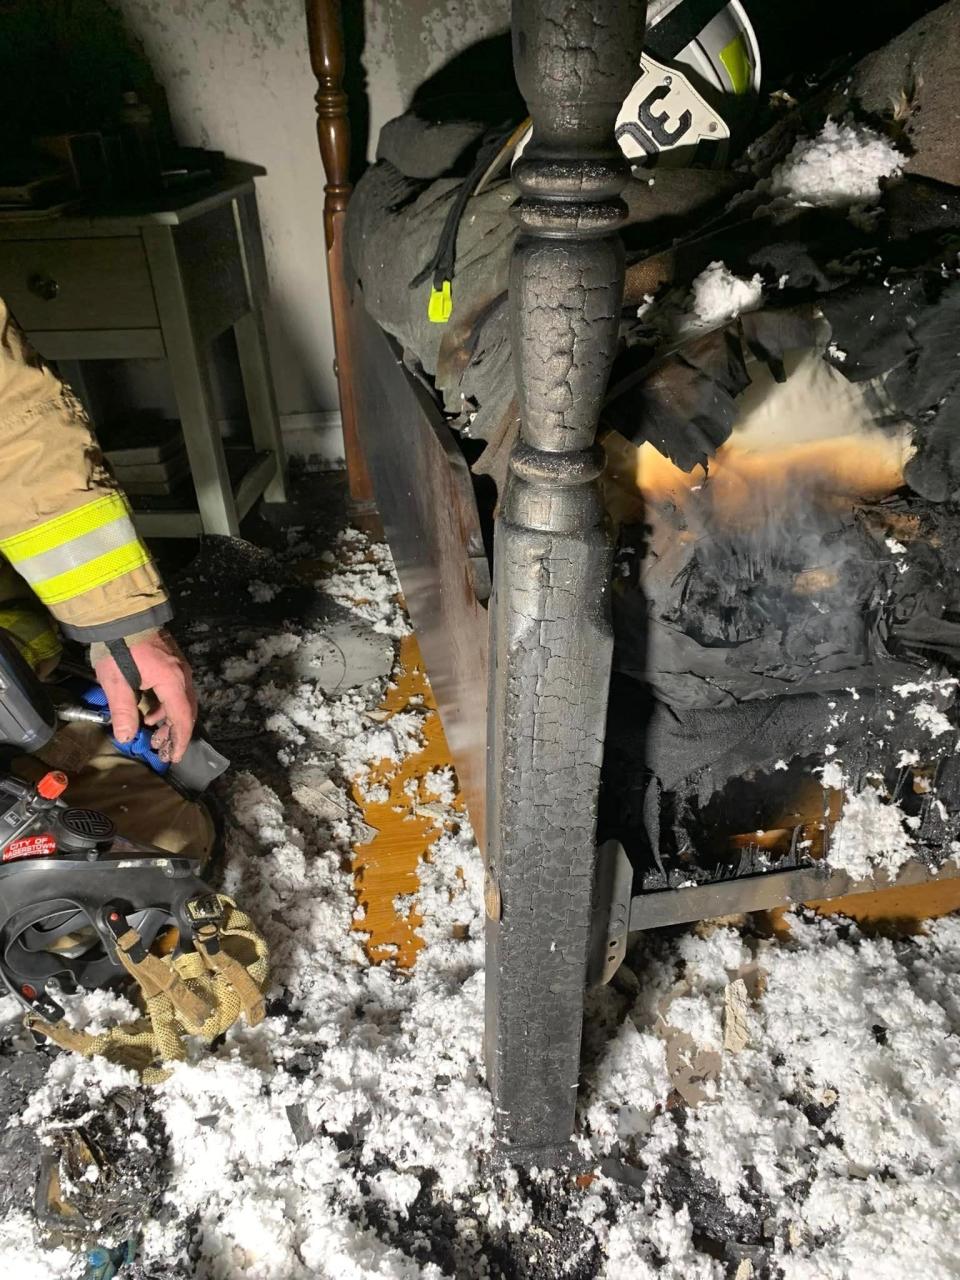 A Friday morning fire was contained to an unoccupied bedroom thanks to the homeowners' quick thinking in reclosing the bedroom door, Leitersburg Fire Chief Kirk Mongan said.